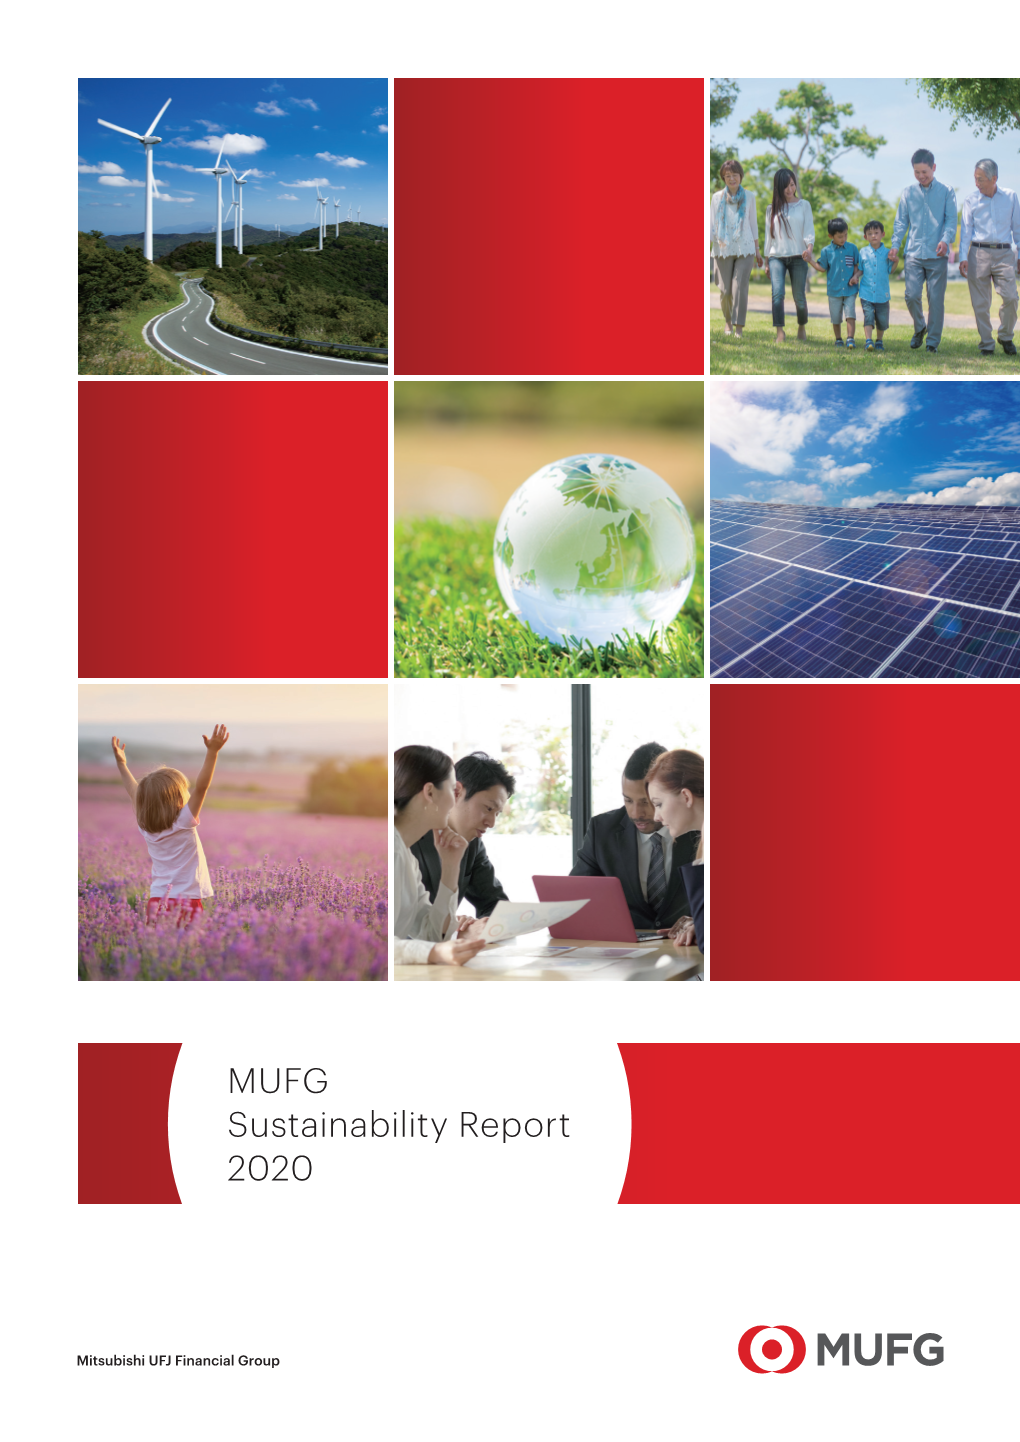 MUFG Sustainability Report 2020 Editorial Policy